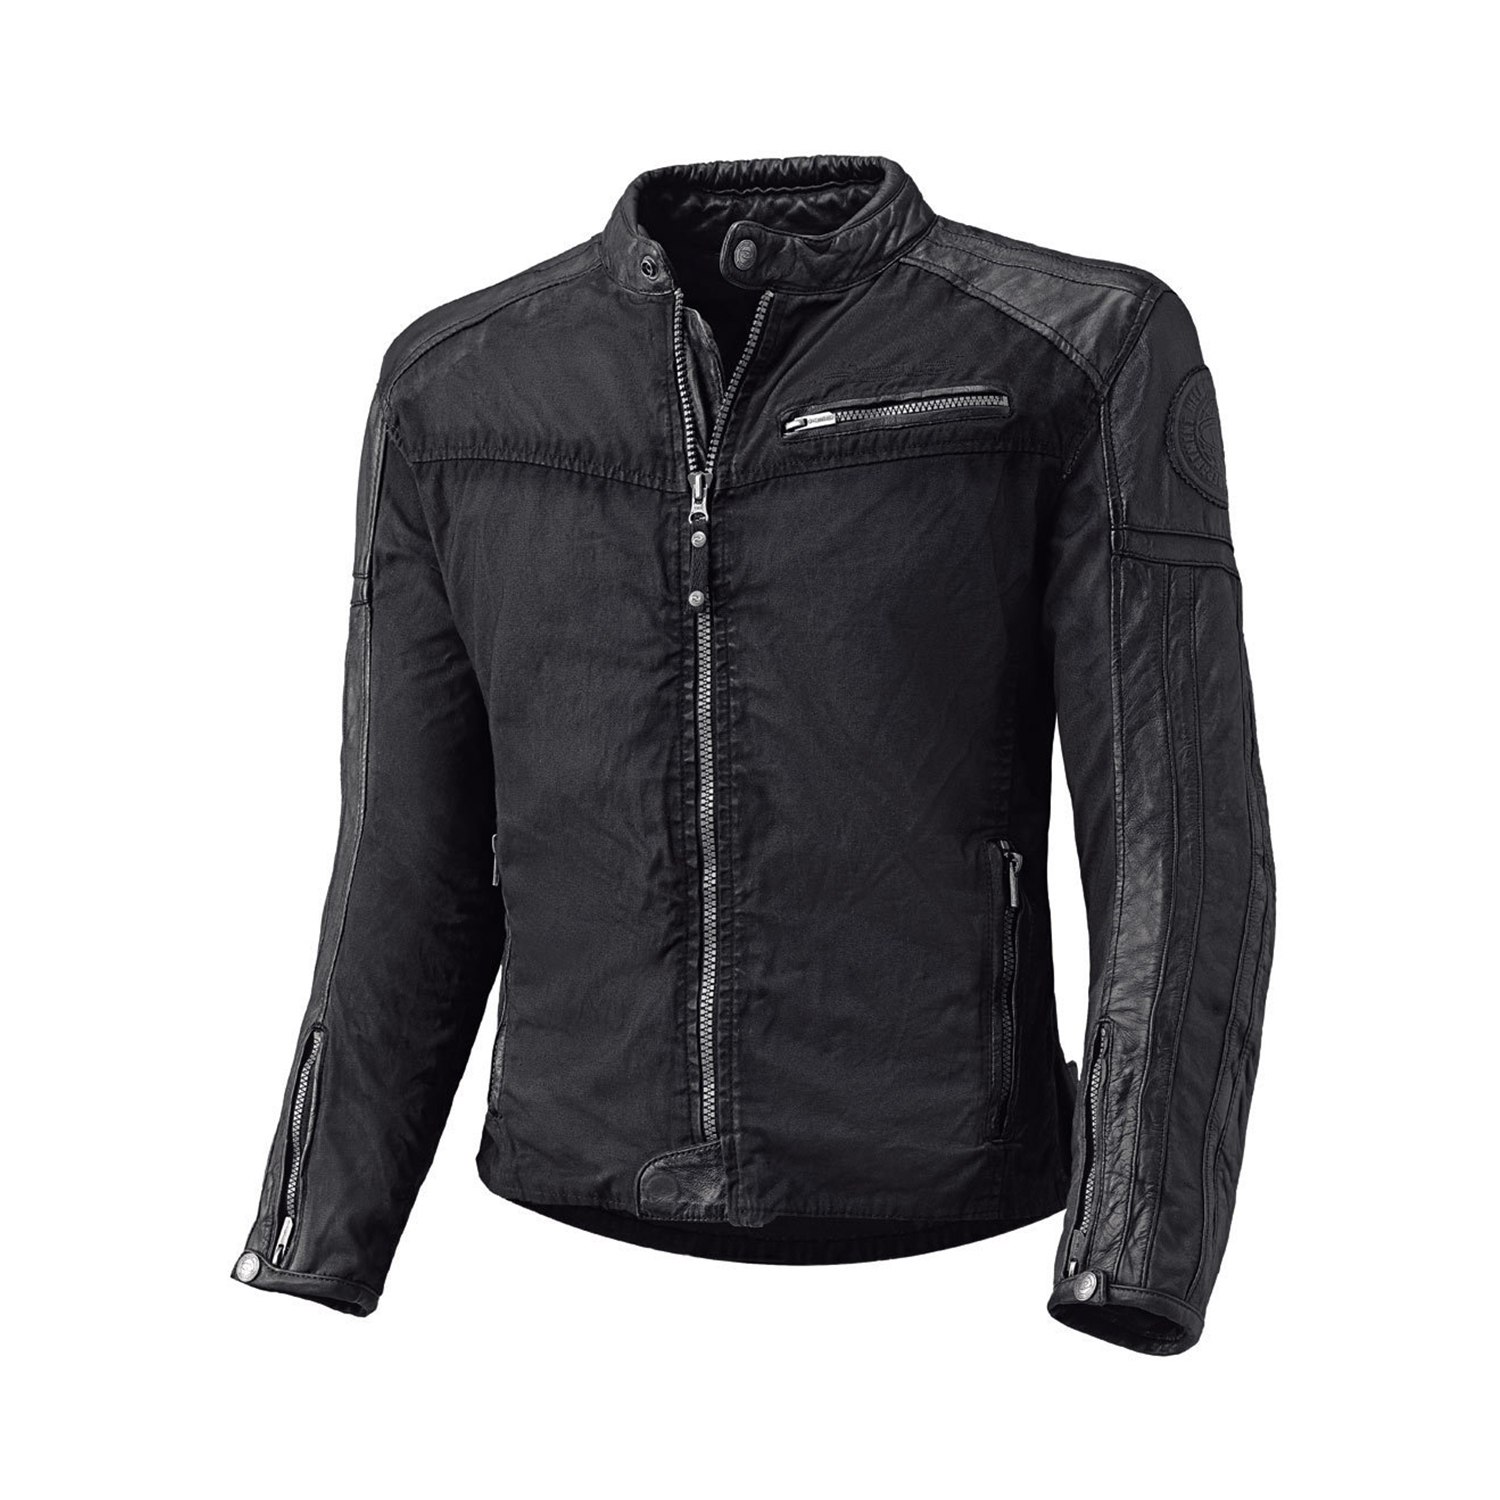 Held Street Hawk Jacket - Available in Various Sizes